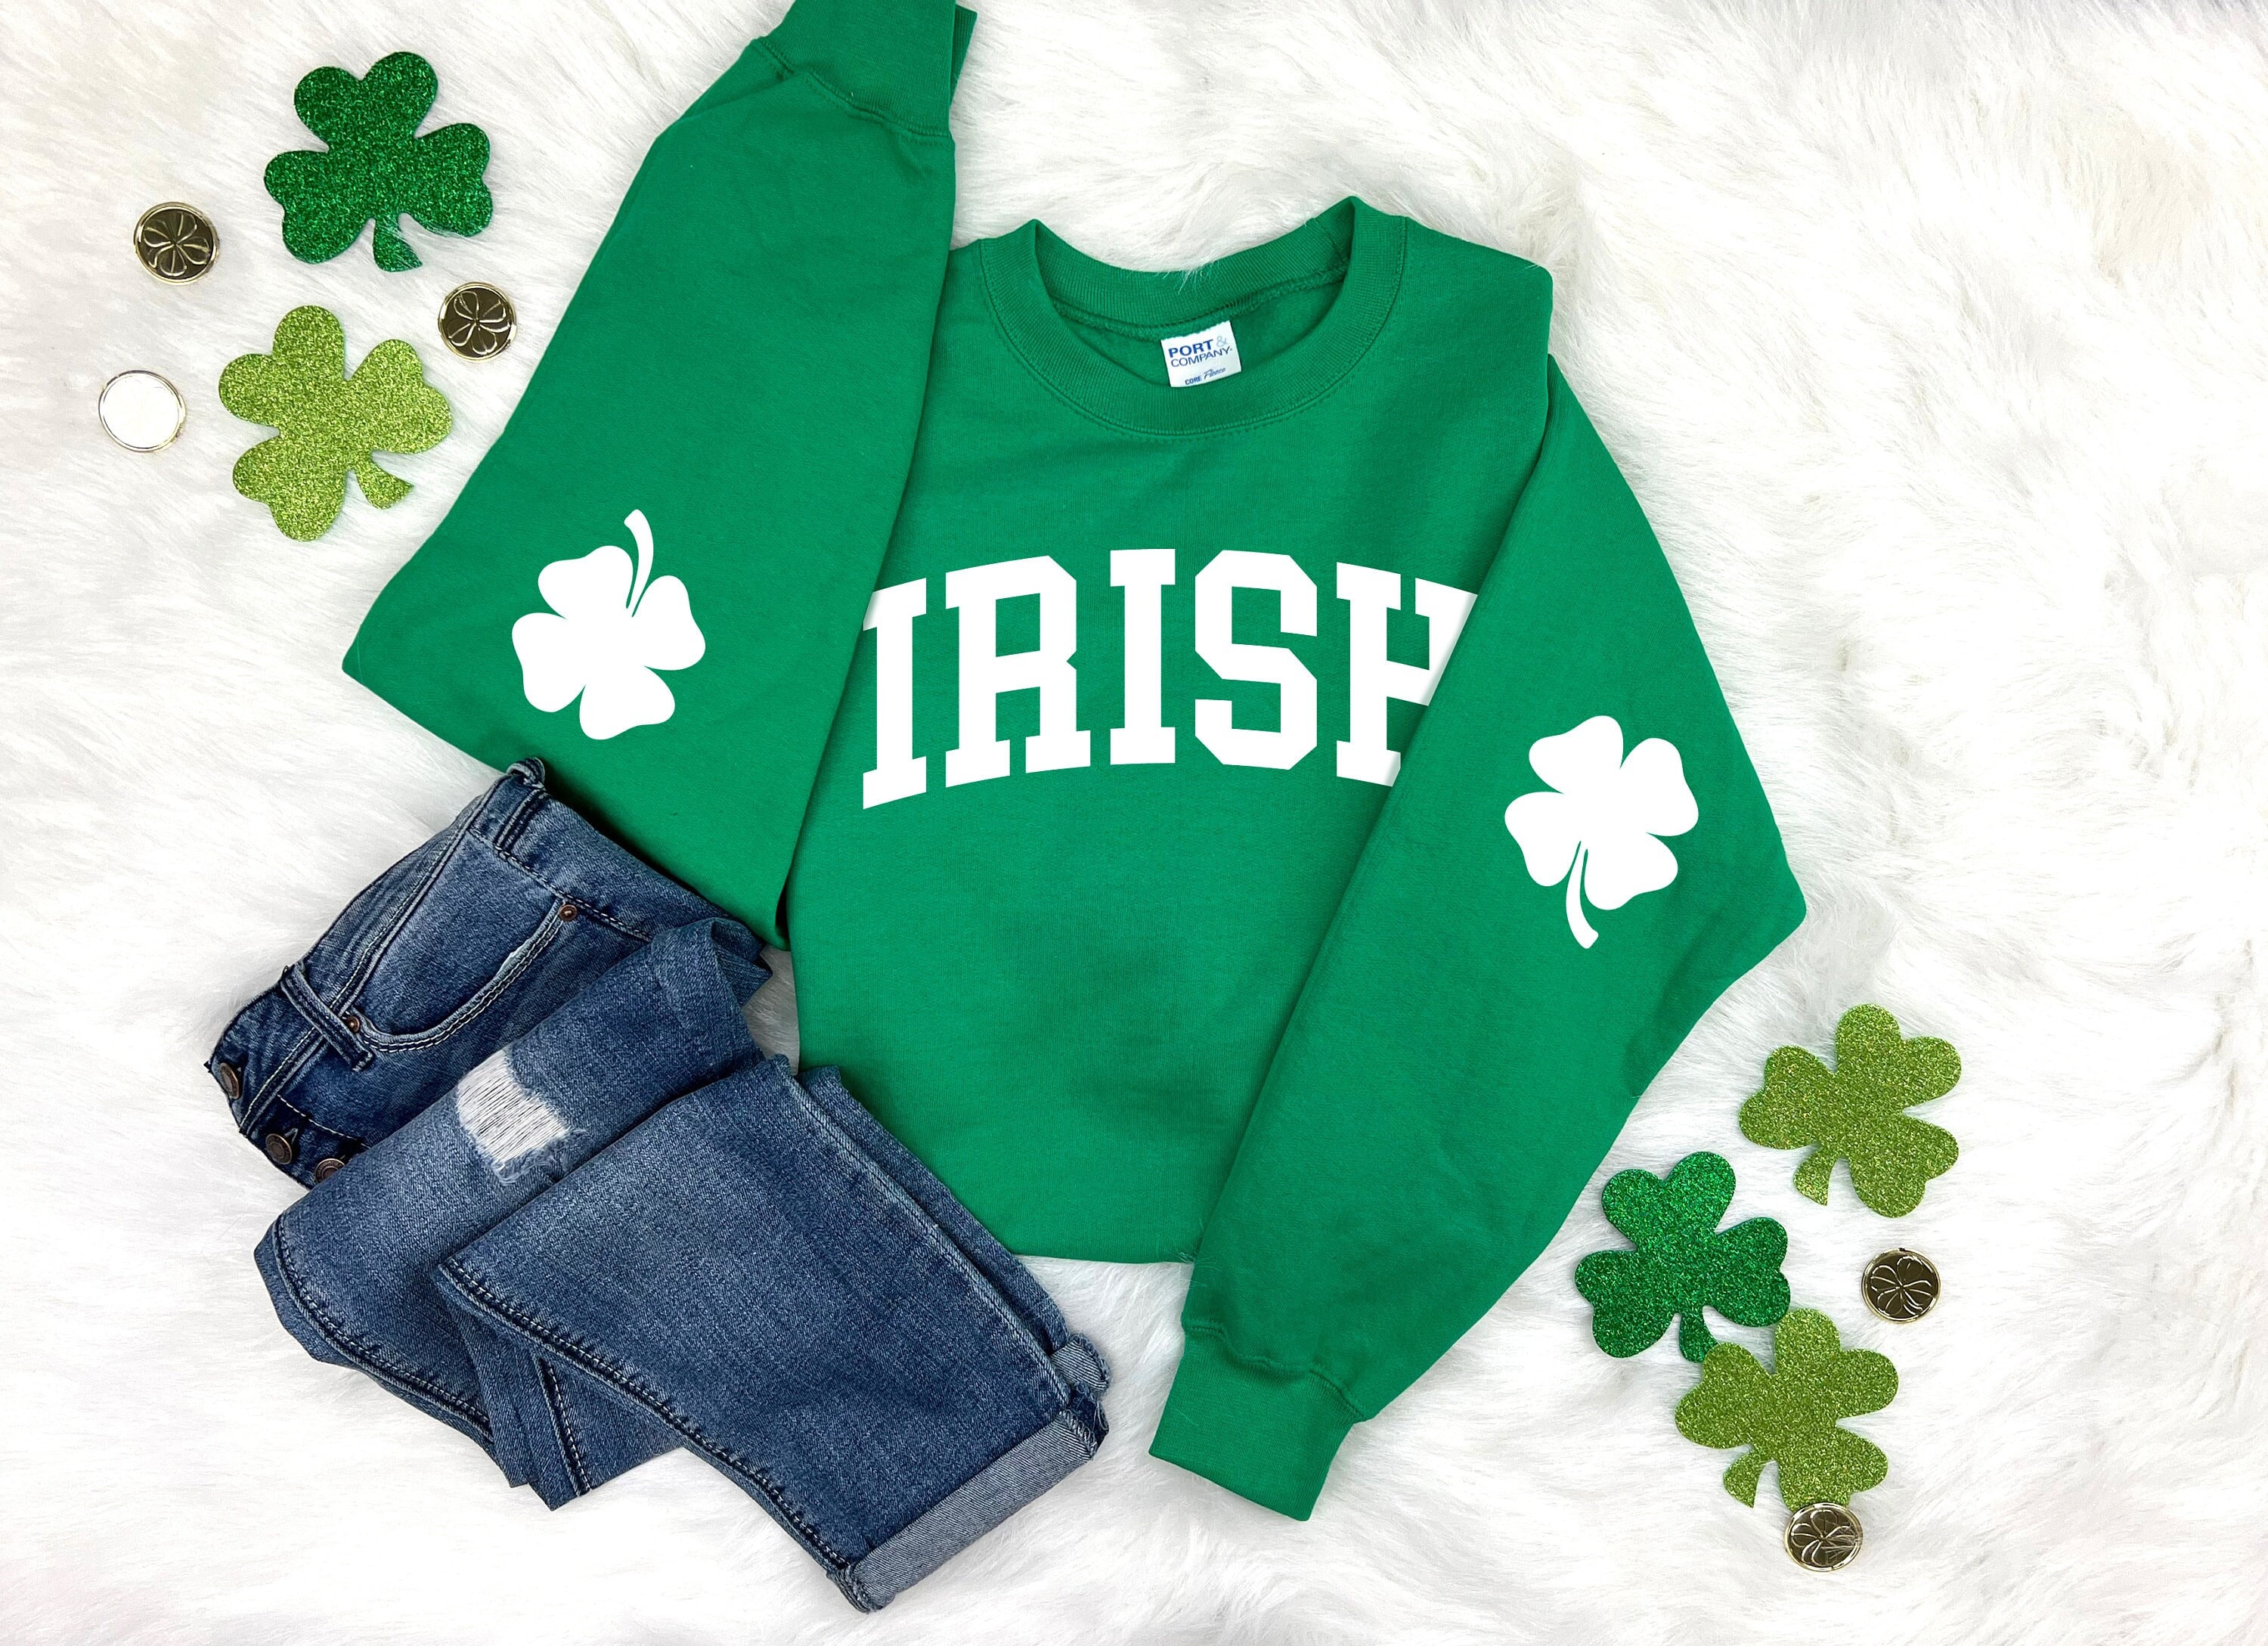 QIPOPIQ Clearance Womens Plus Size Tops St. Patrick's Day Casual Clothes  Funny Solide Fit Tee Shirts Blouse Solid Shirt with Shamrock 